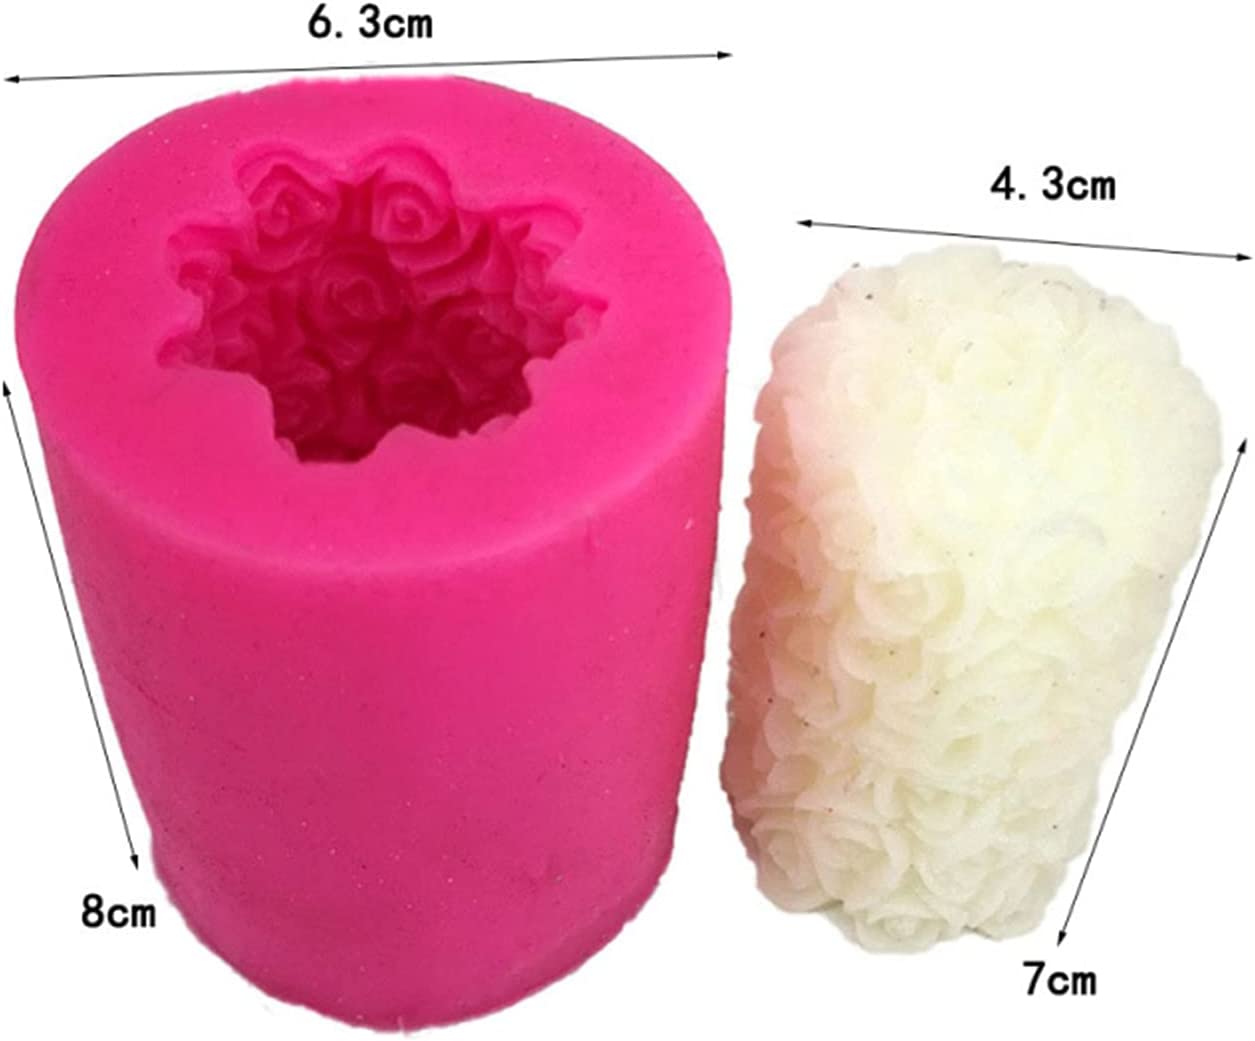 Fewo 2 Pack 3D Rose Candle Molds Cylinder and Sphere Shape Rose Flower Silicone Molds for Making DIY Homemade Beeswax Candles Bath Bomb Mini Soap